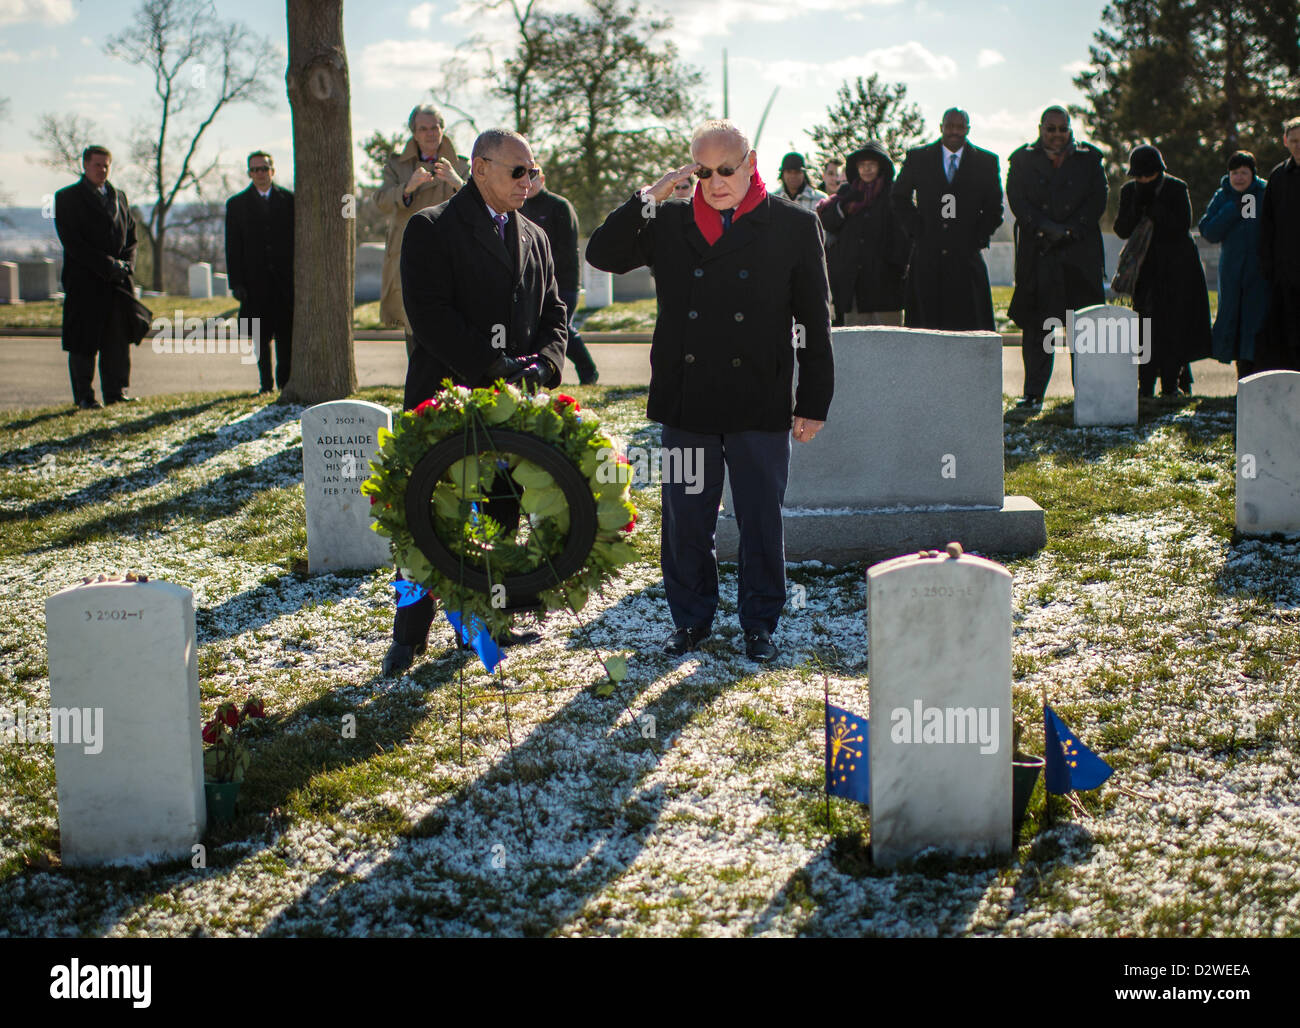 Apollo 11 astronaut Buzz Aldrin salutes as NASA Administrator Charles Bolden looks on during a wreath laying ceremony as part of NASA's Day of Remembrance February 1, 2013 at Arlington National Cemetery, Arlington, VA.  Wreathes were laid in memory of those men and women who lost their lives in the quest for space exploration. Stock Photo